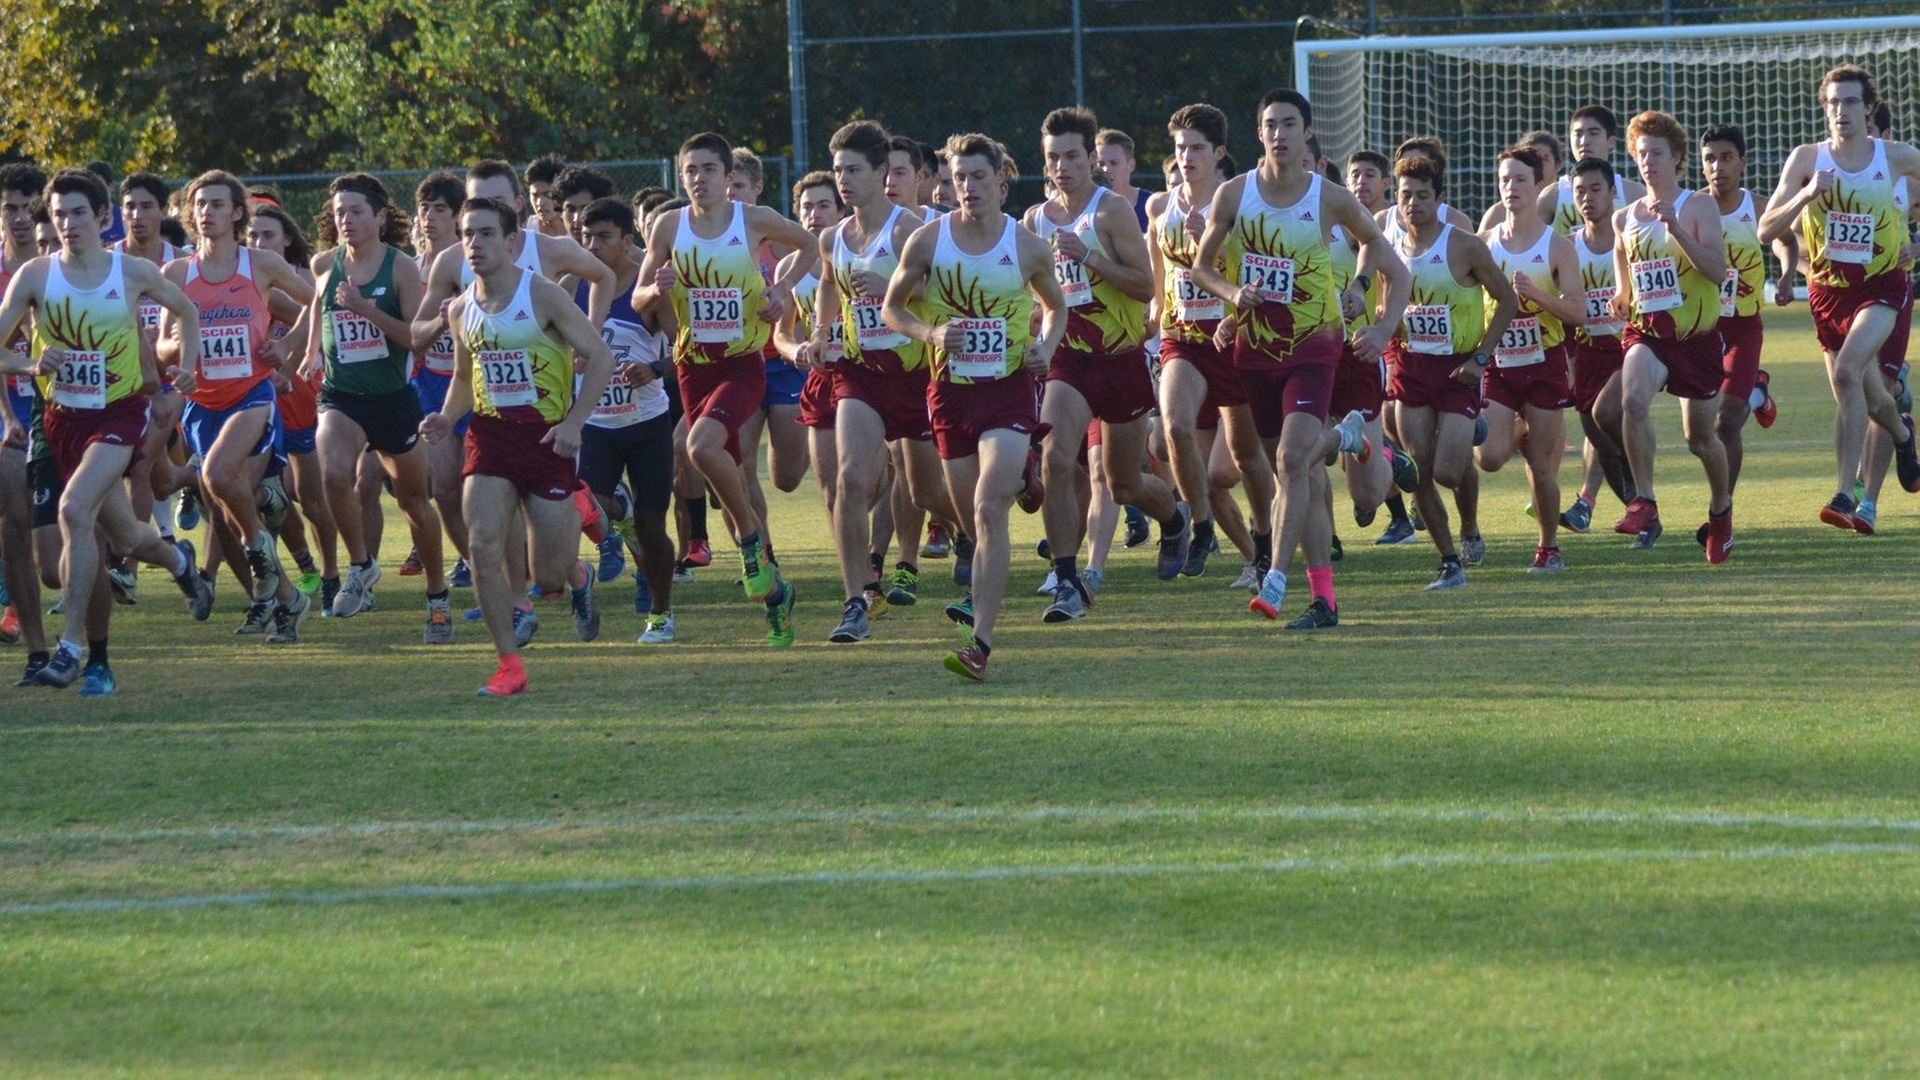 The Stags in action at the 2019 SCIAC Championships